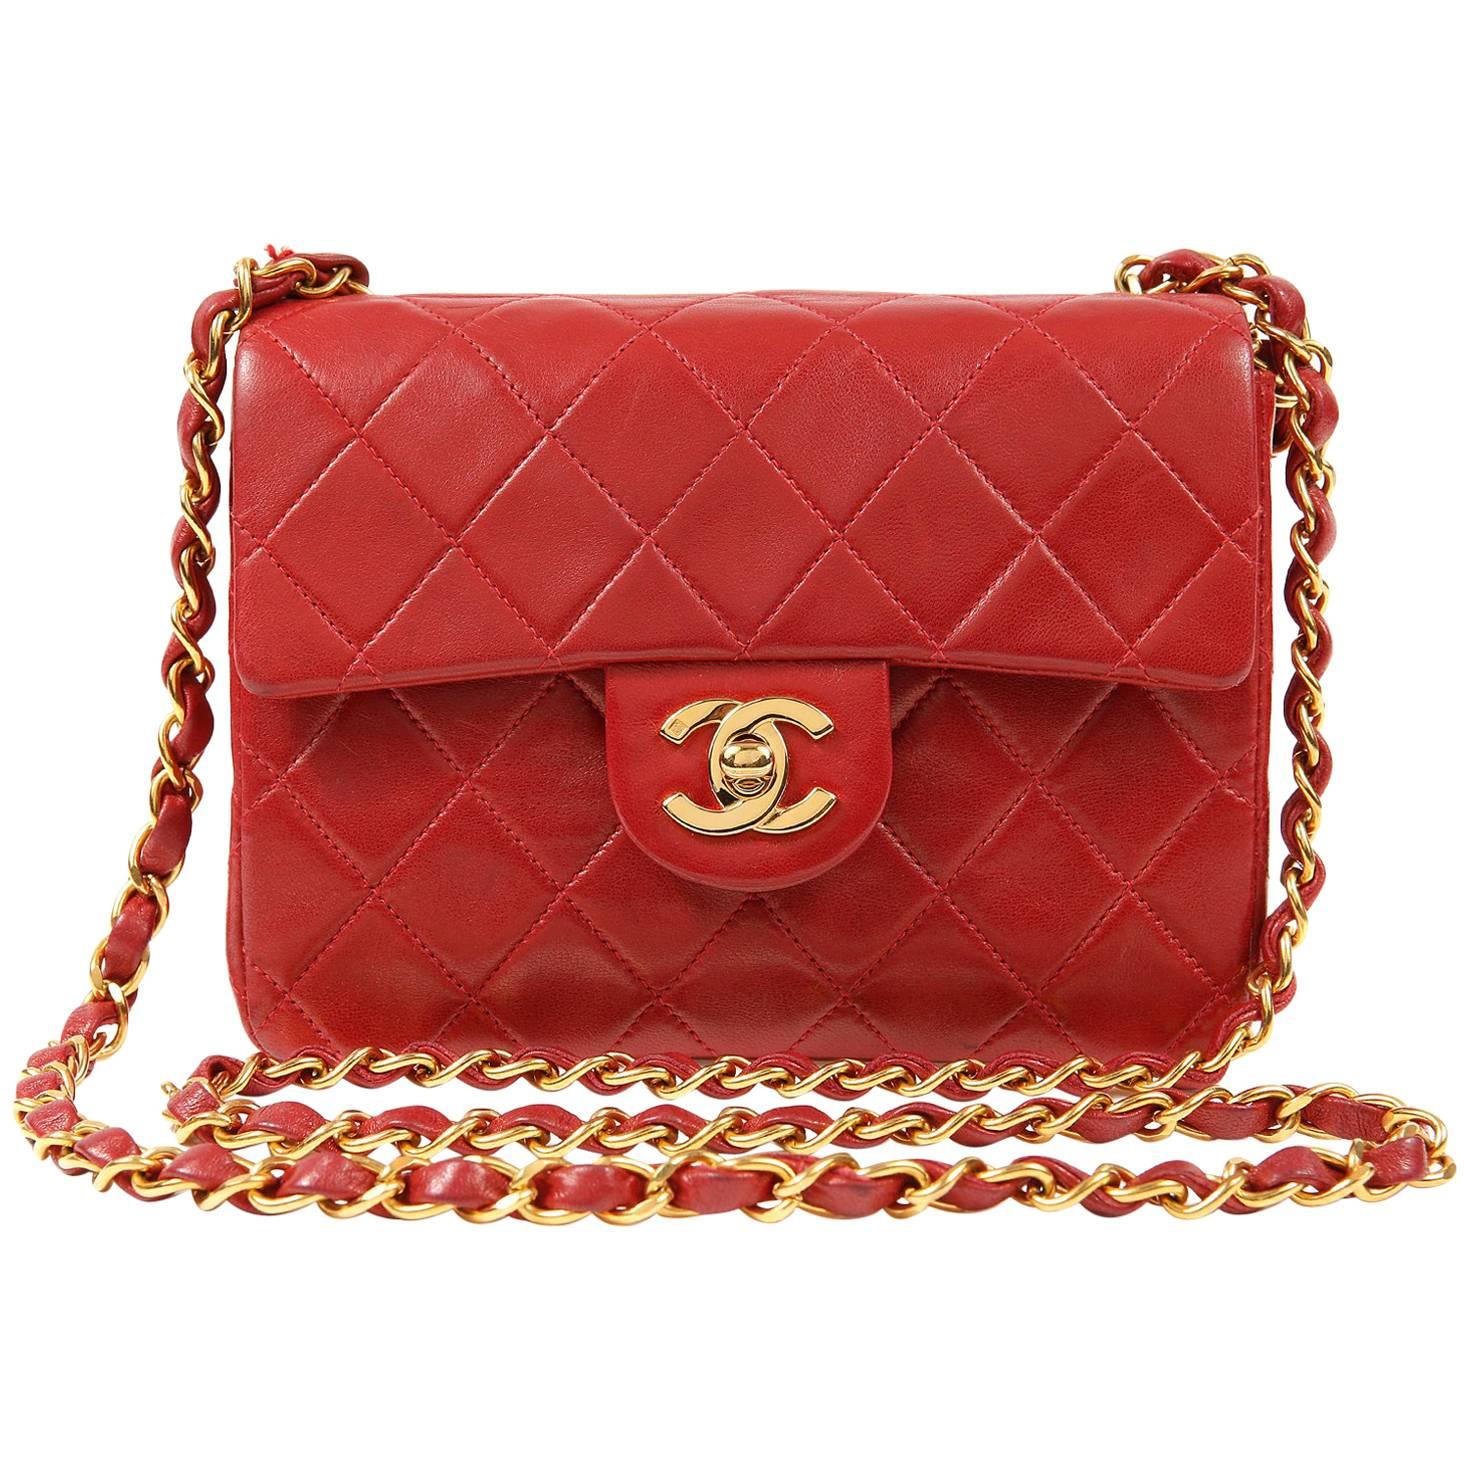 Chanel Red Lambskin Mini Classic Flap bag with GHW